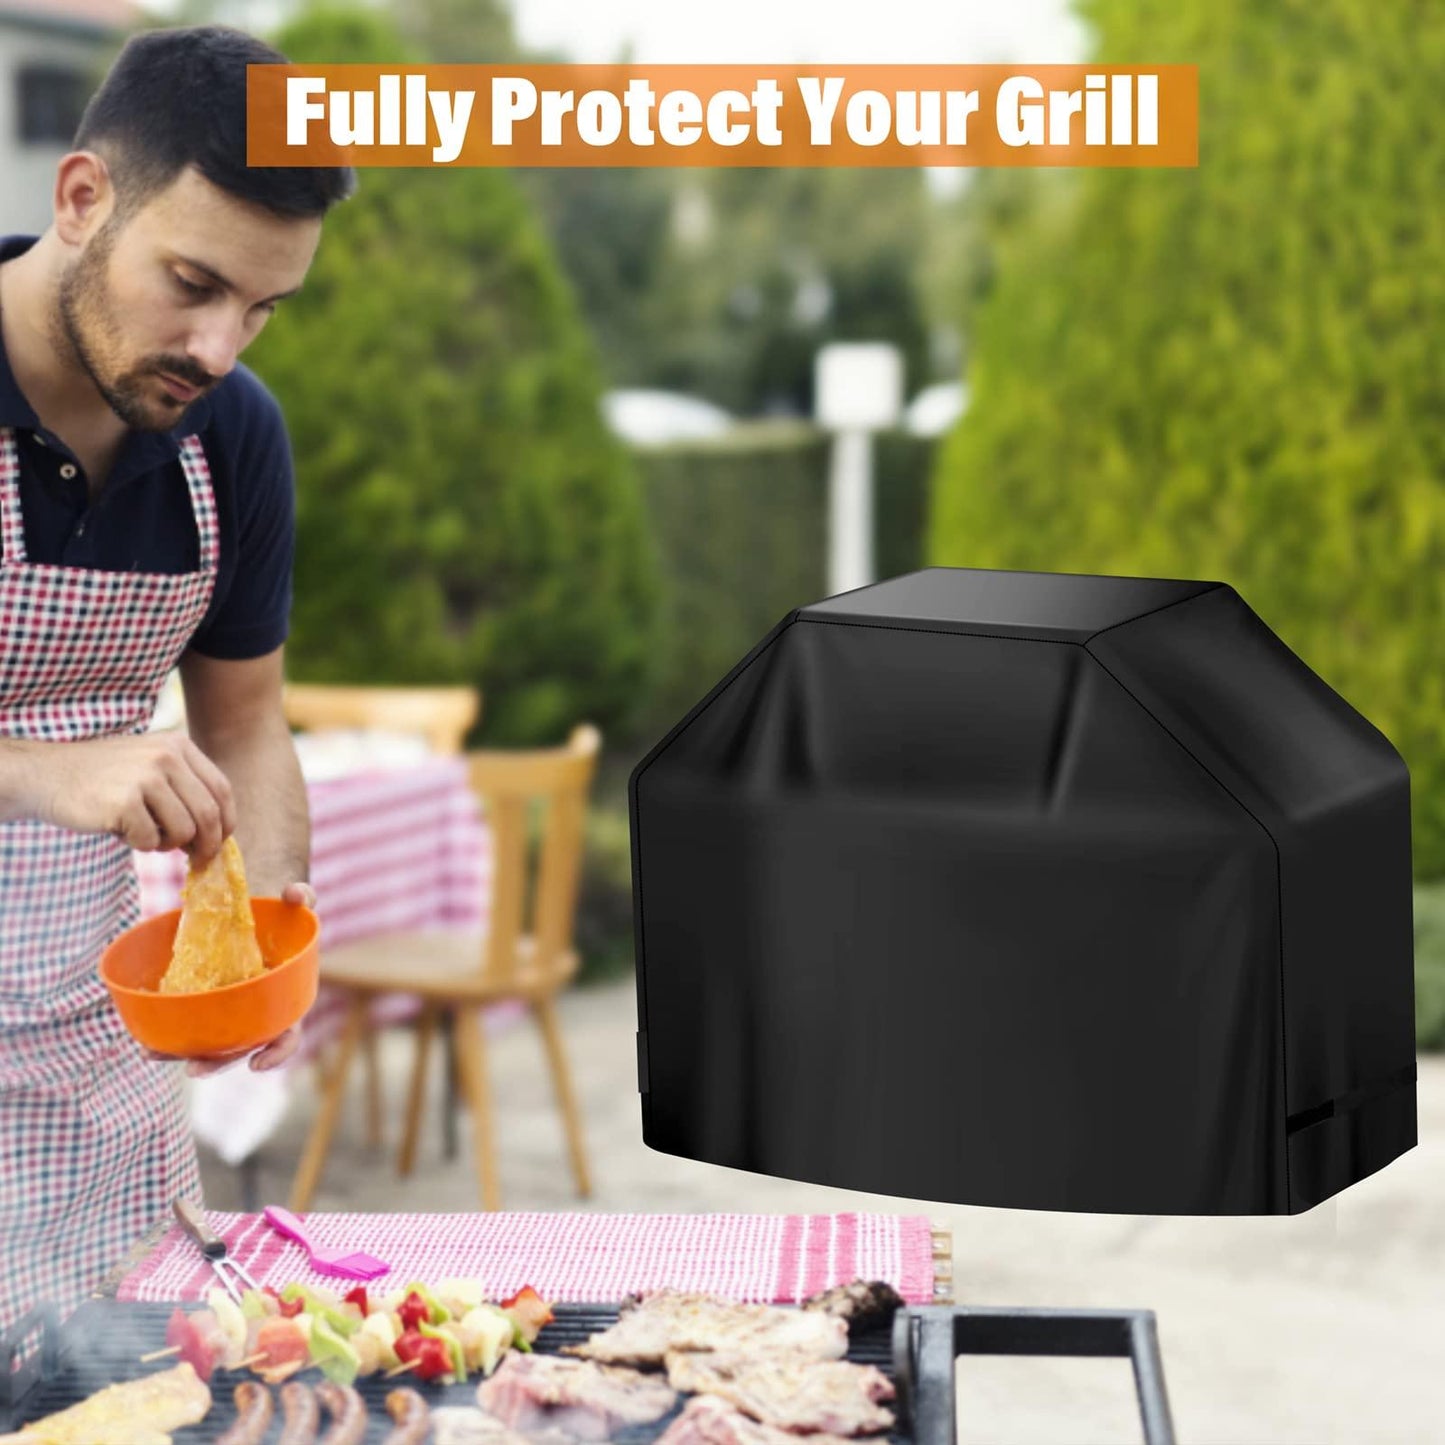 Grill Cover, BBQ Cover 59 inch,Grill Covers Waterproof,Anti-UV & Fade Resistant, Barbecue Grill Cover with Velcro Straps,Gas Grill Cover Rip Resistant,for Weber,Char Broil,Nexgrill Grills - CookCave